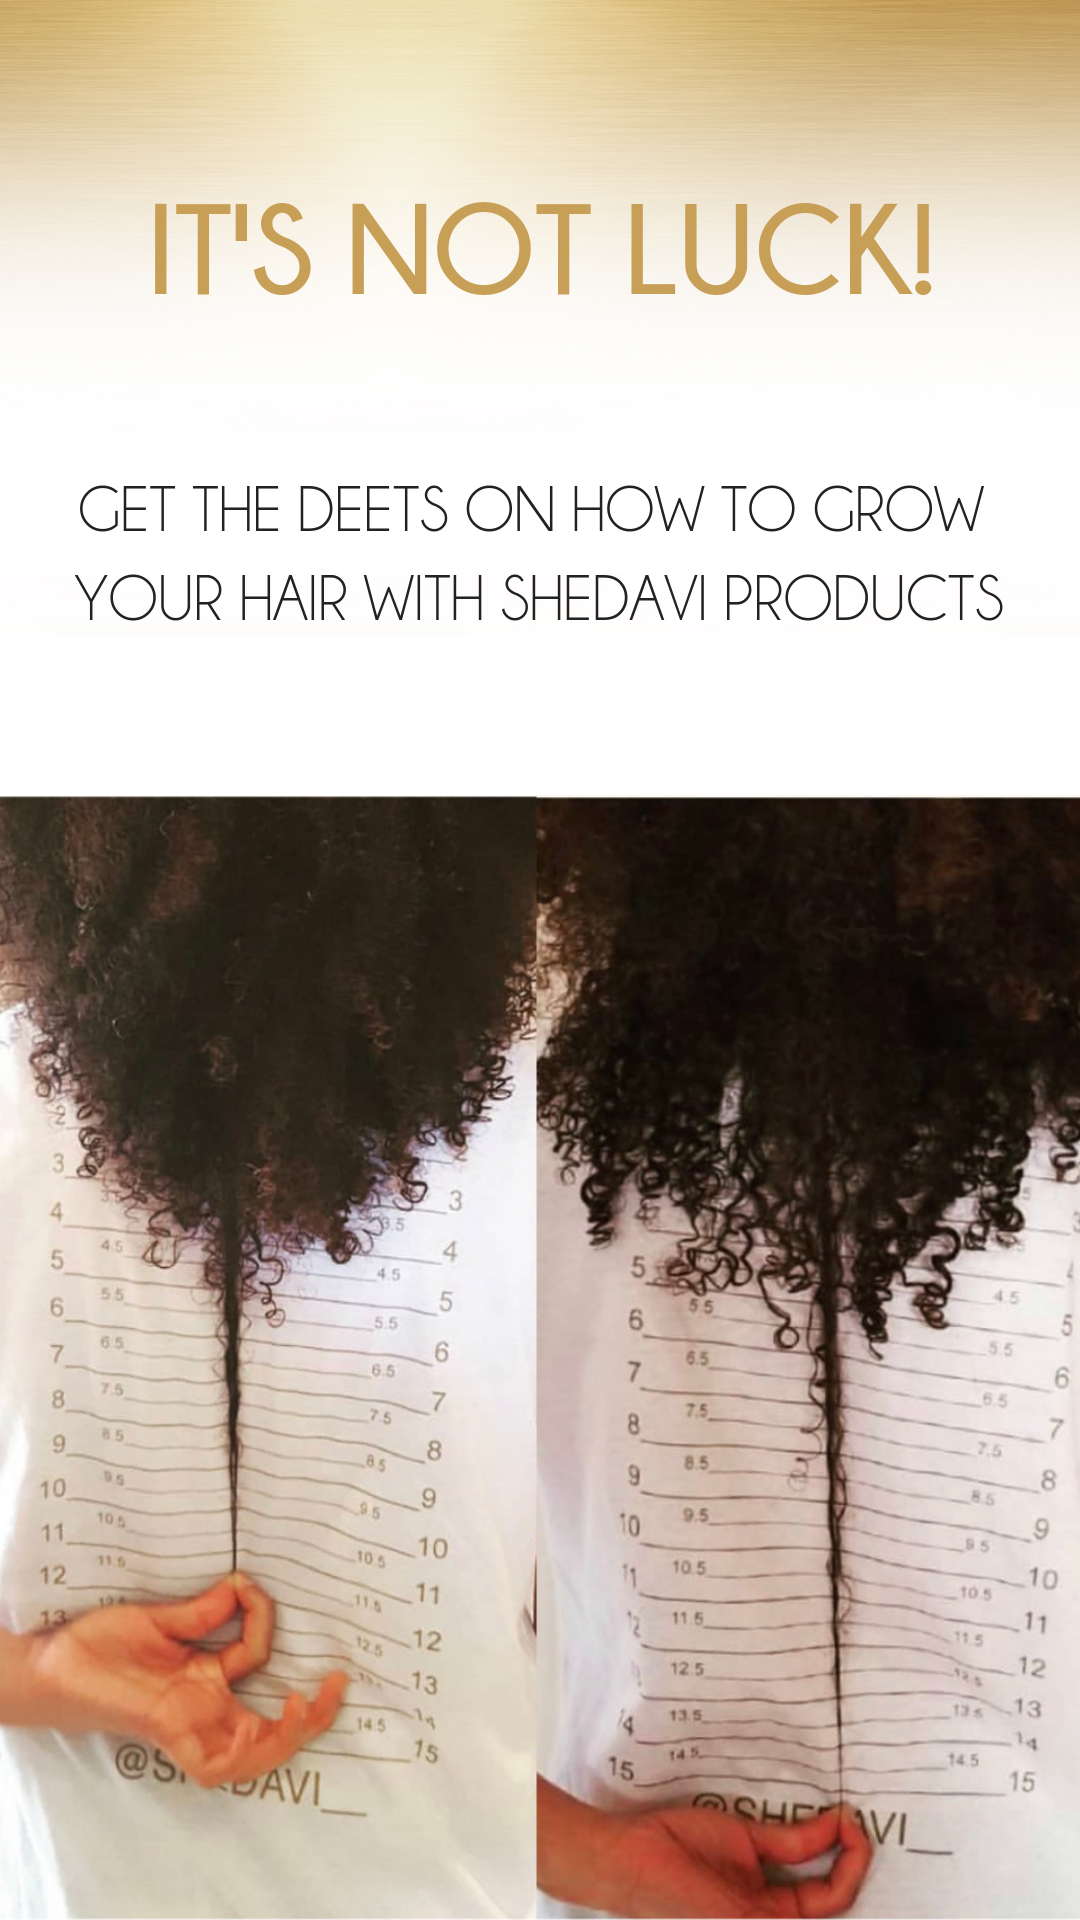 It’s not just luck: how to get your hair to grow using Shedavi products